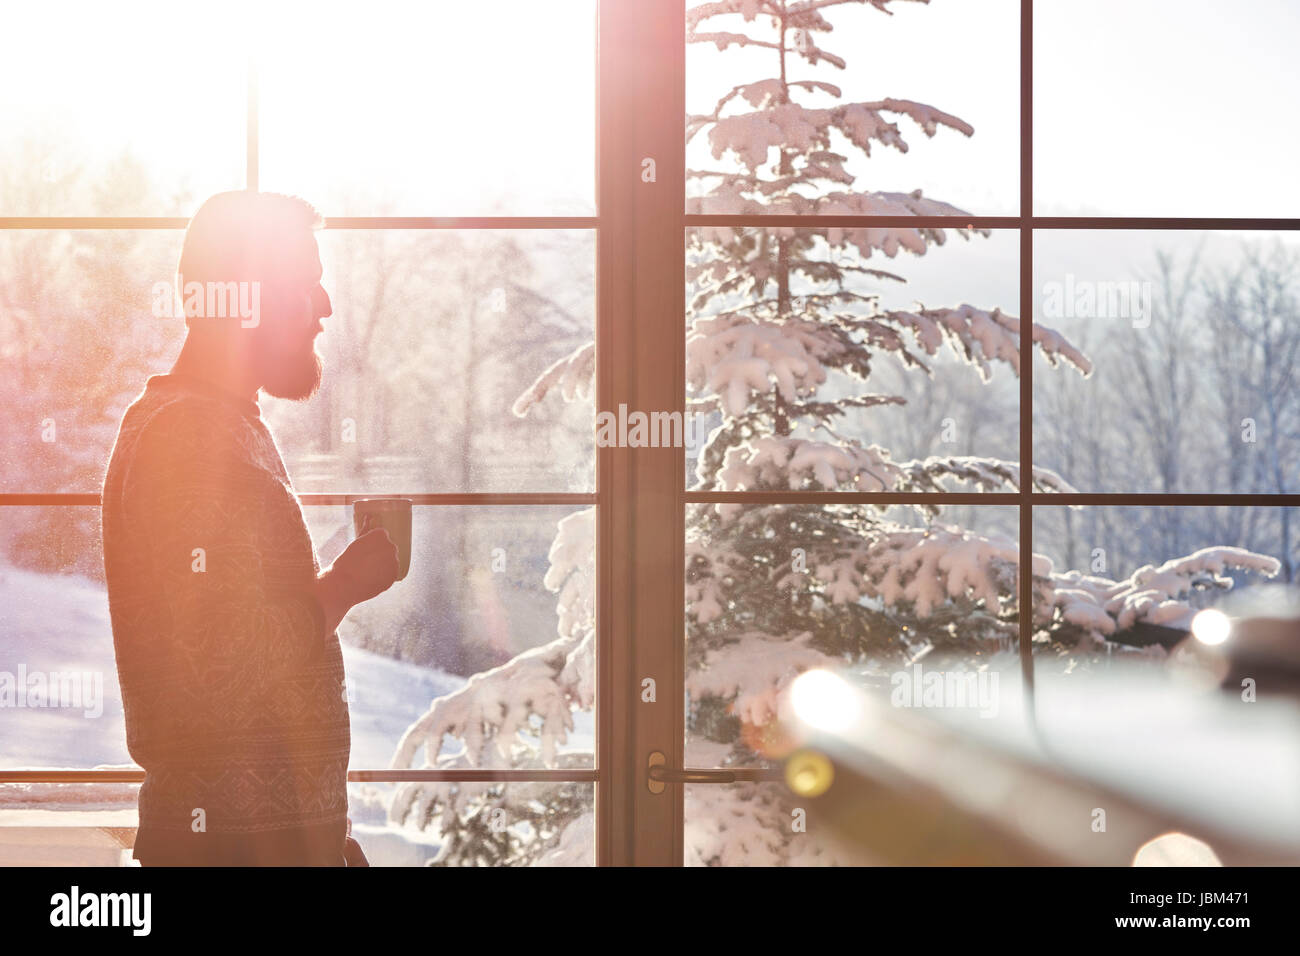 Man drinking coffee at sunny window with view of snowy trees Stock Photo